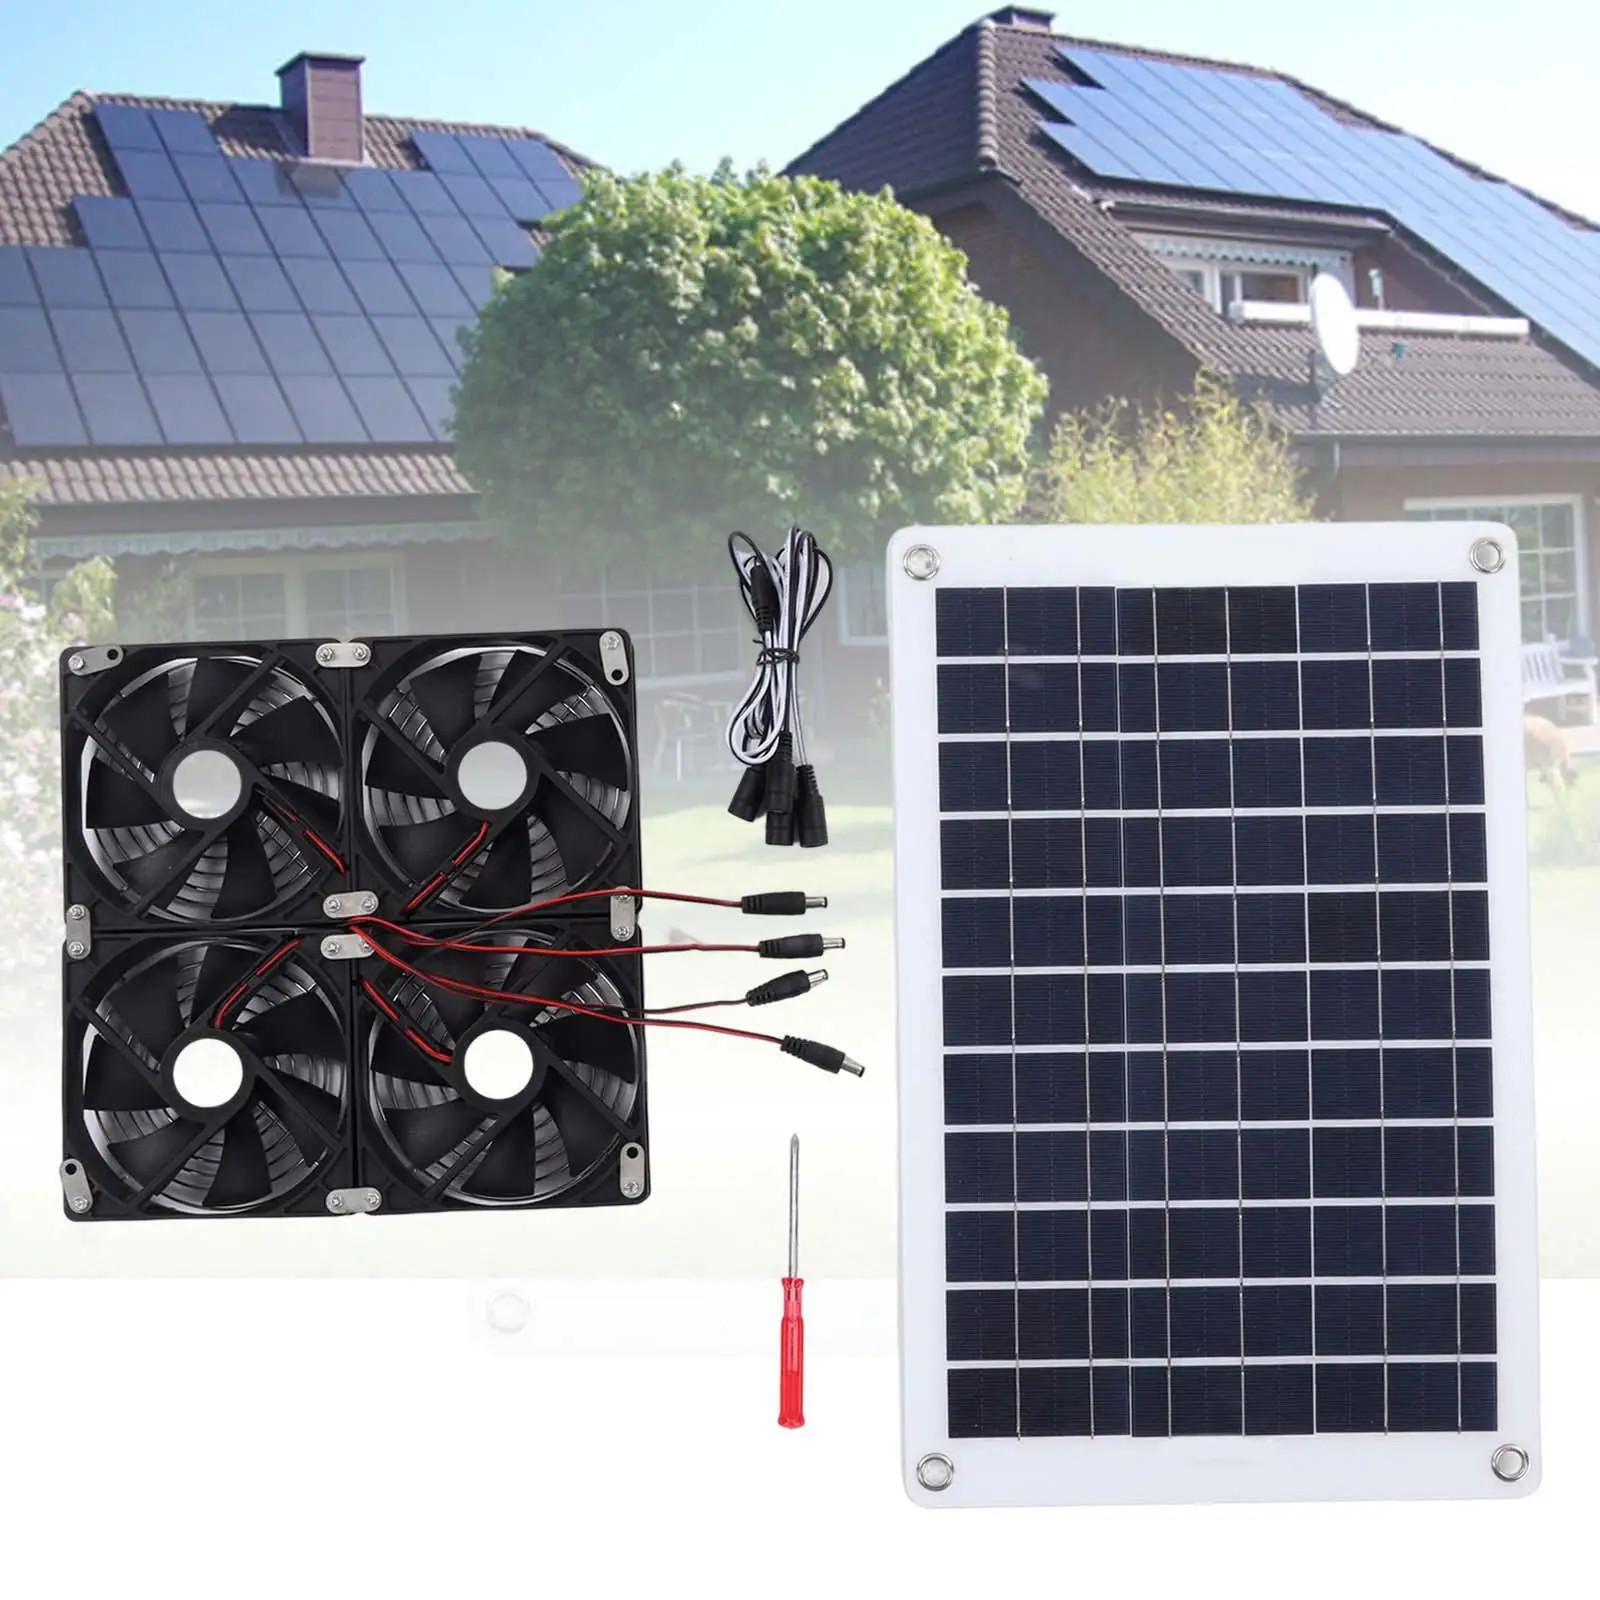 Solar Panel Exhaust Fan Solar Panel Fan Kit Mini Ventilator Portable for Greenhouse Dog House Sheds Outside Small Chicken Coops